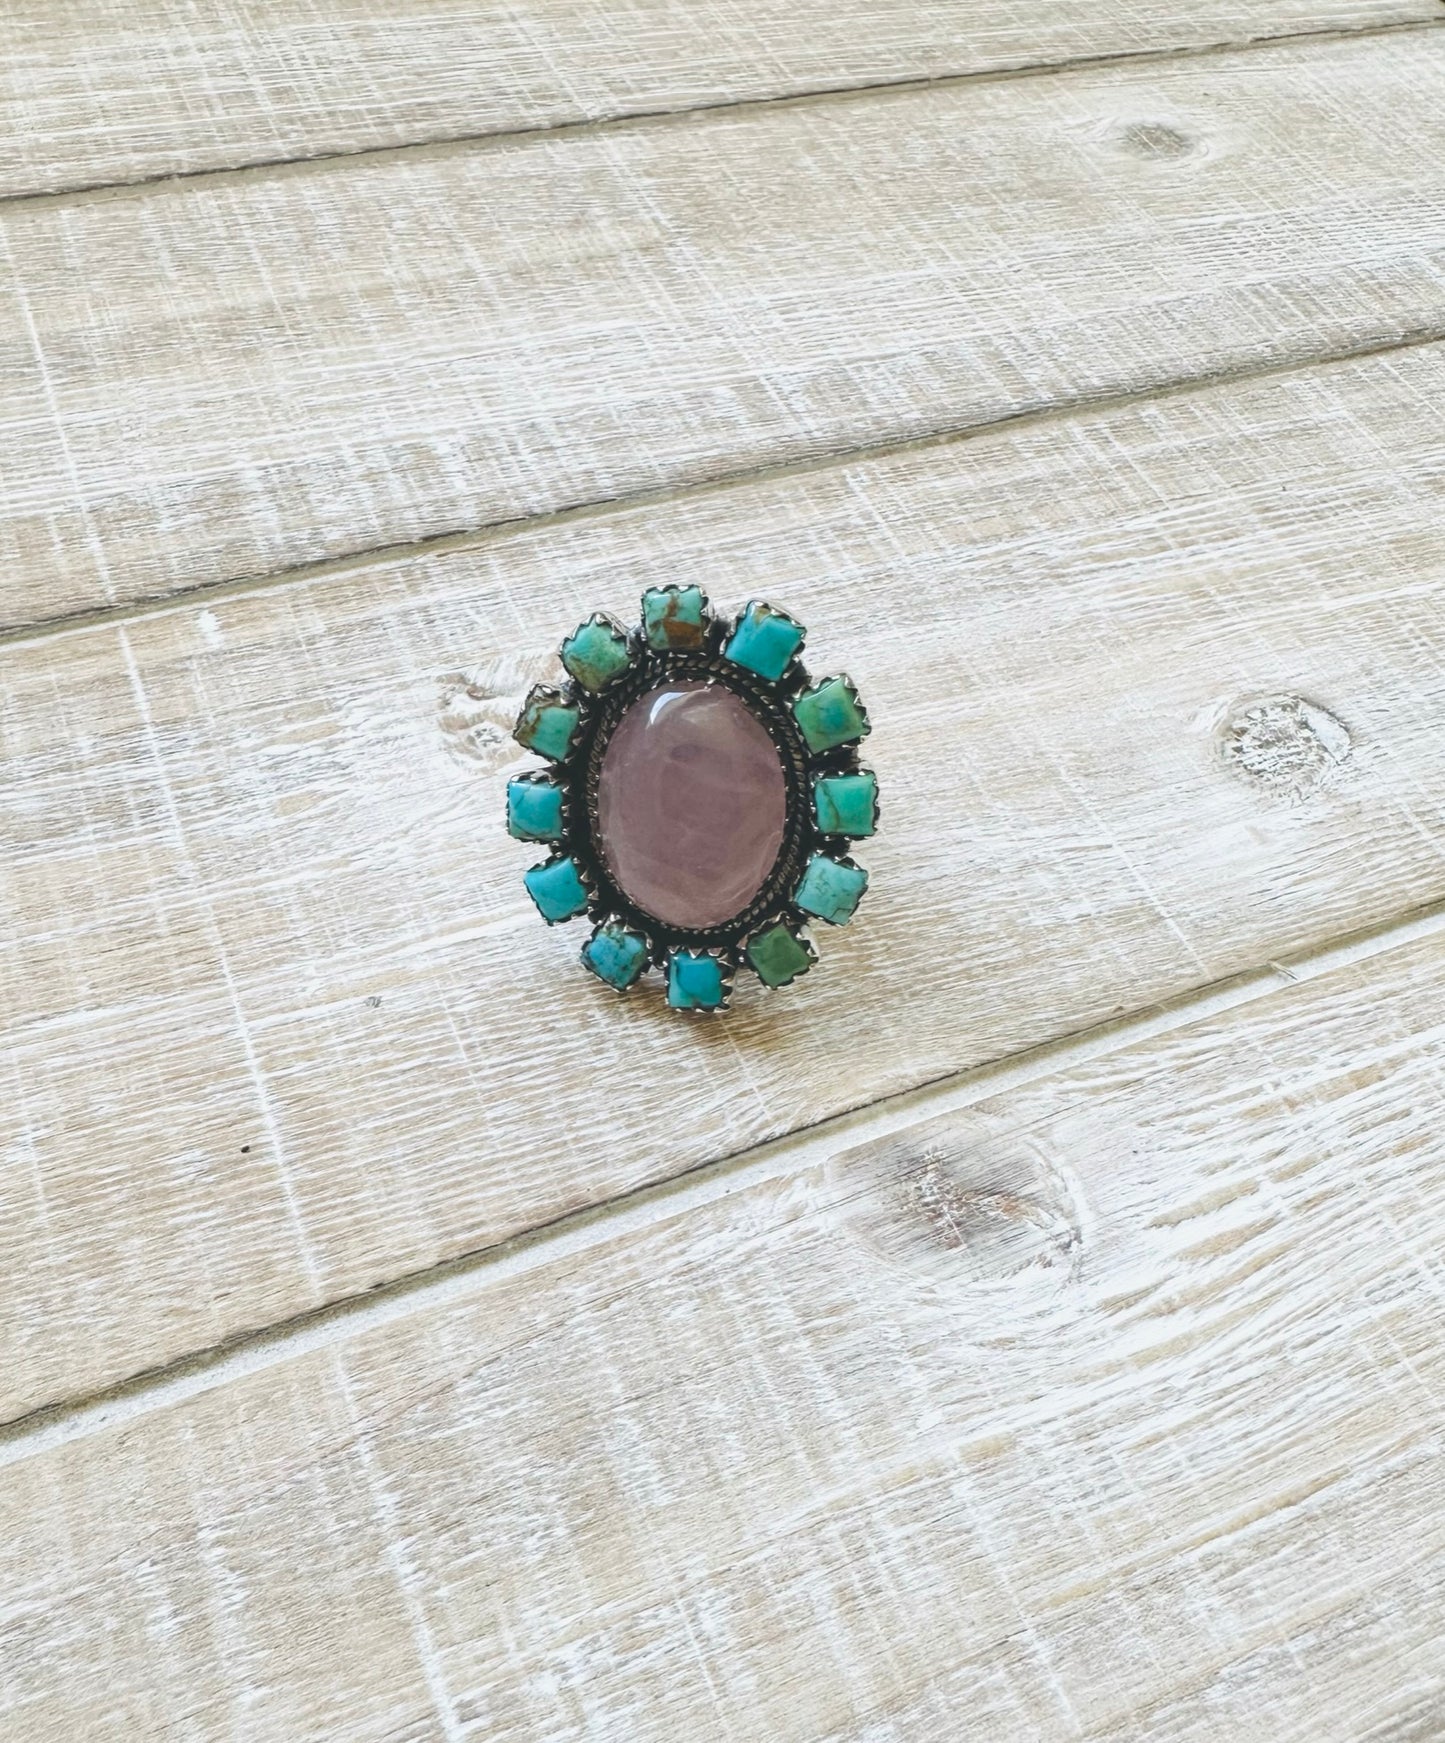 Opal/Turquoise Adjustable Ring